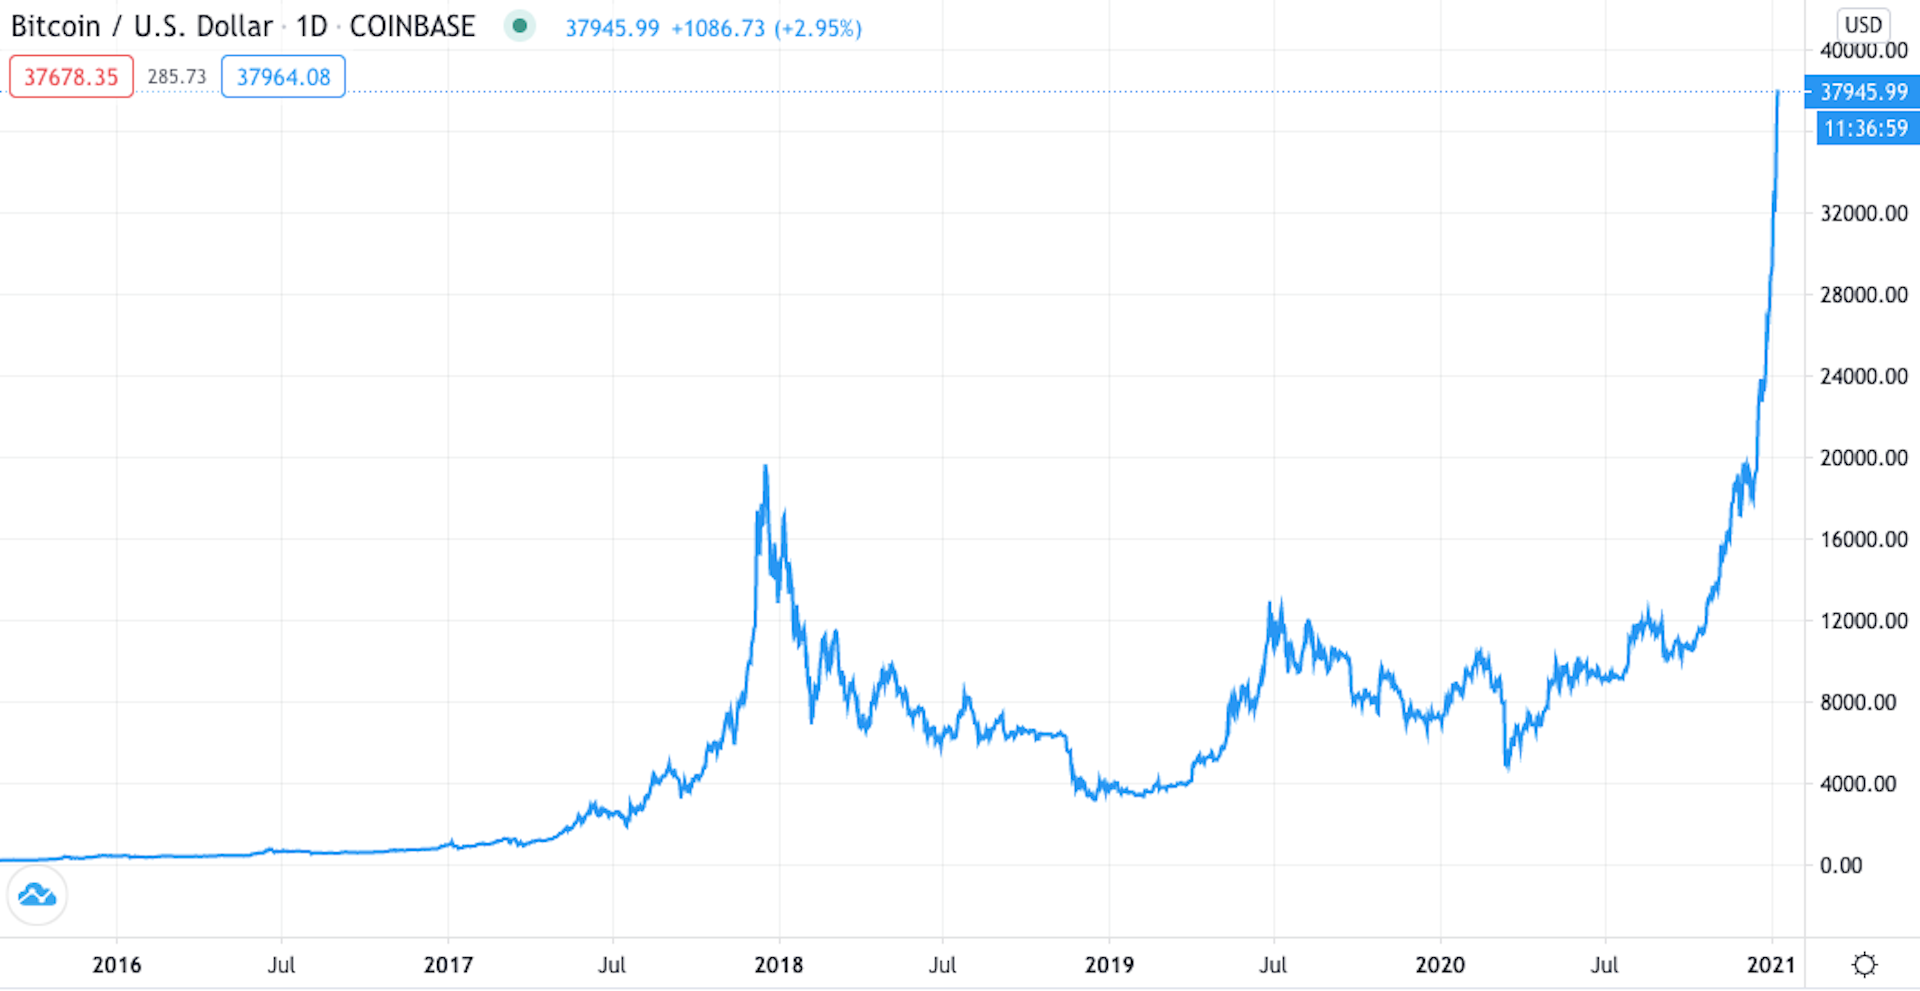 Bitcoin: why the price has exploded - and where it goes from here